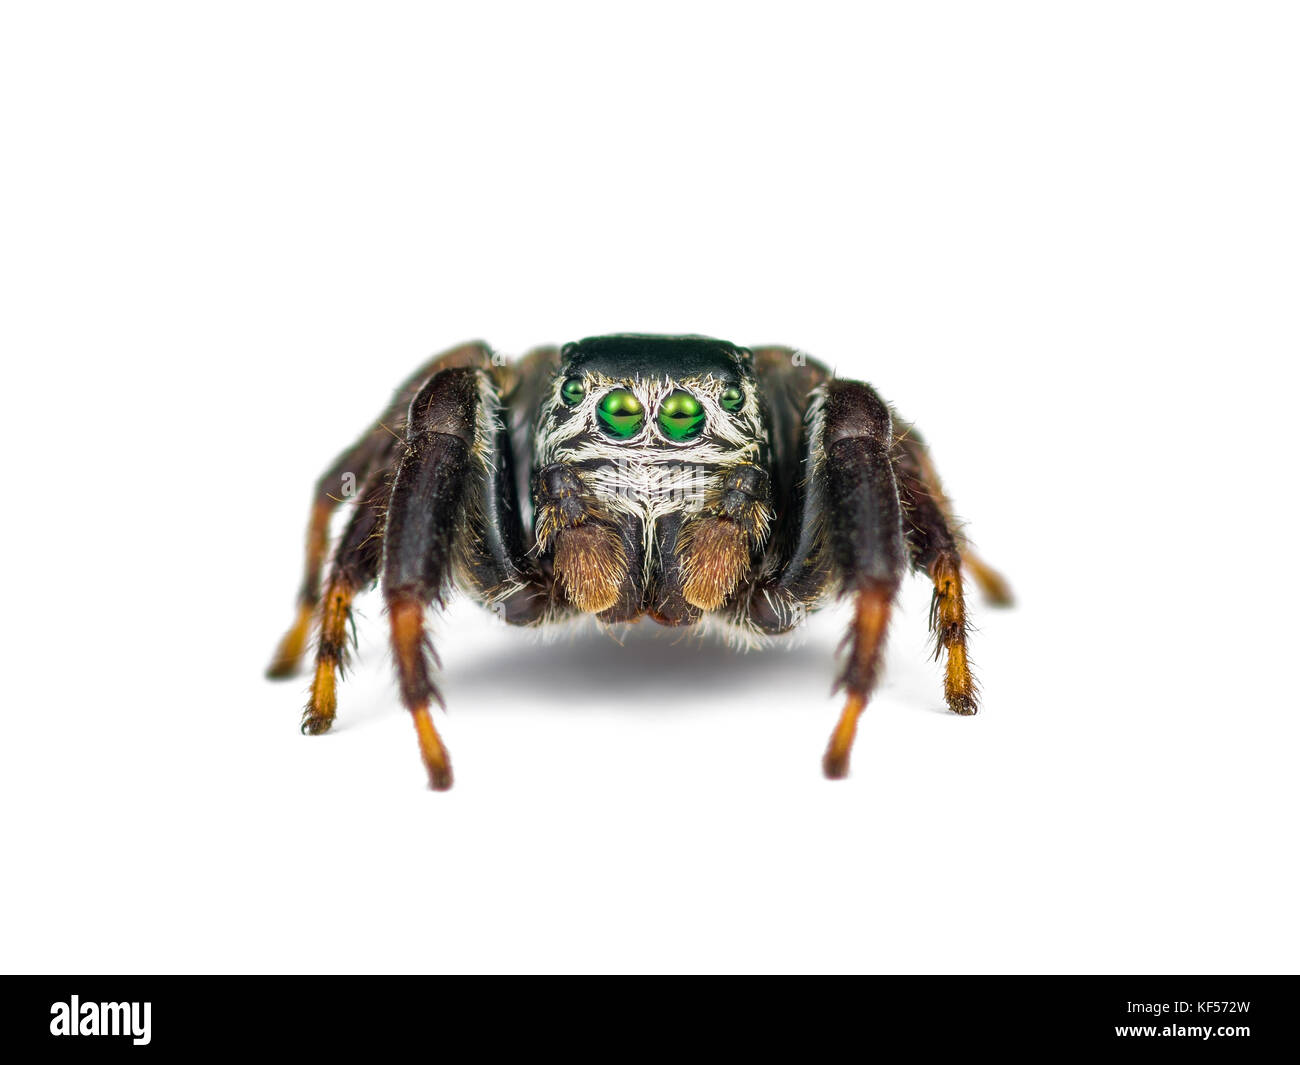 Jumping Spider Arachnid Insect Isolated on White Stock Photo